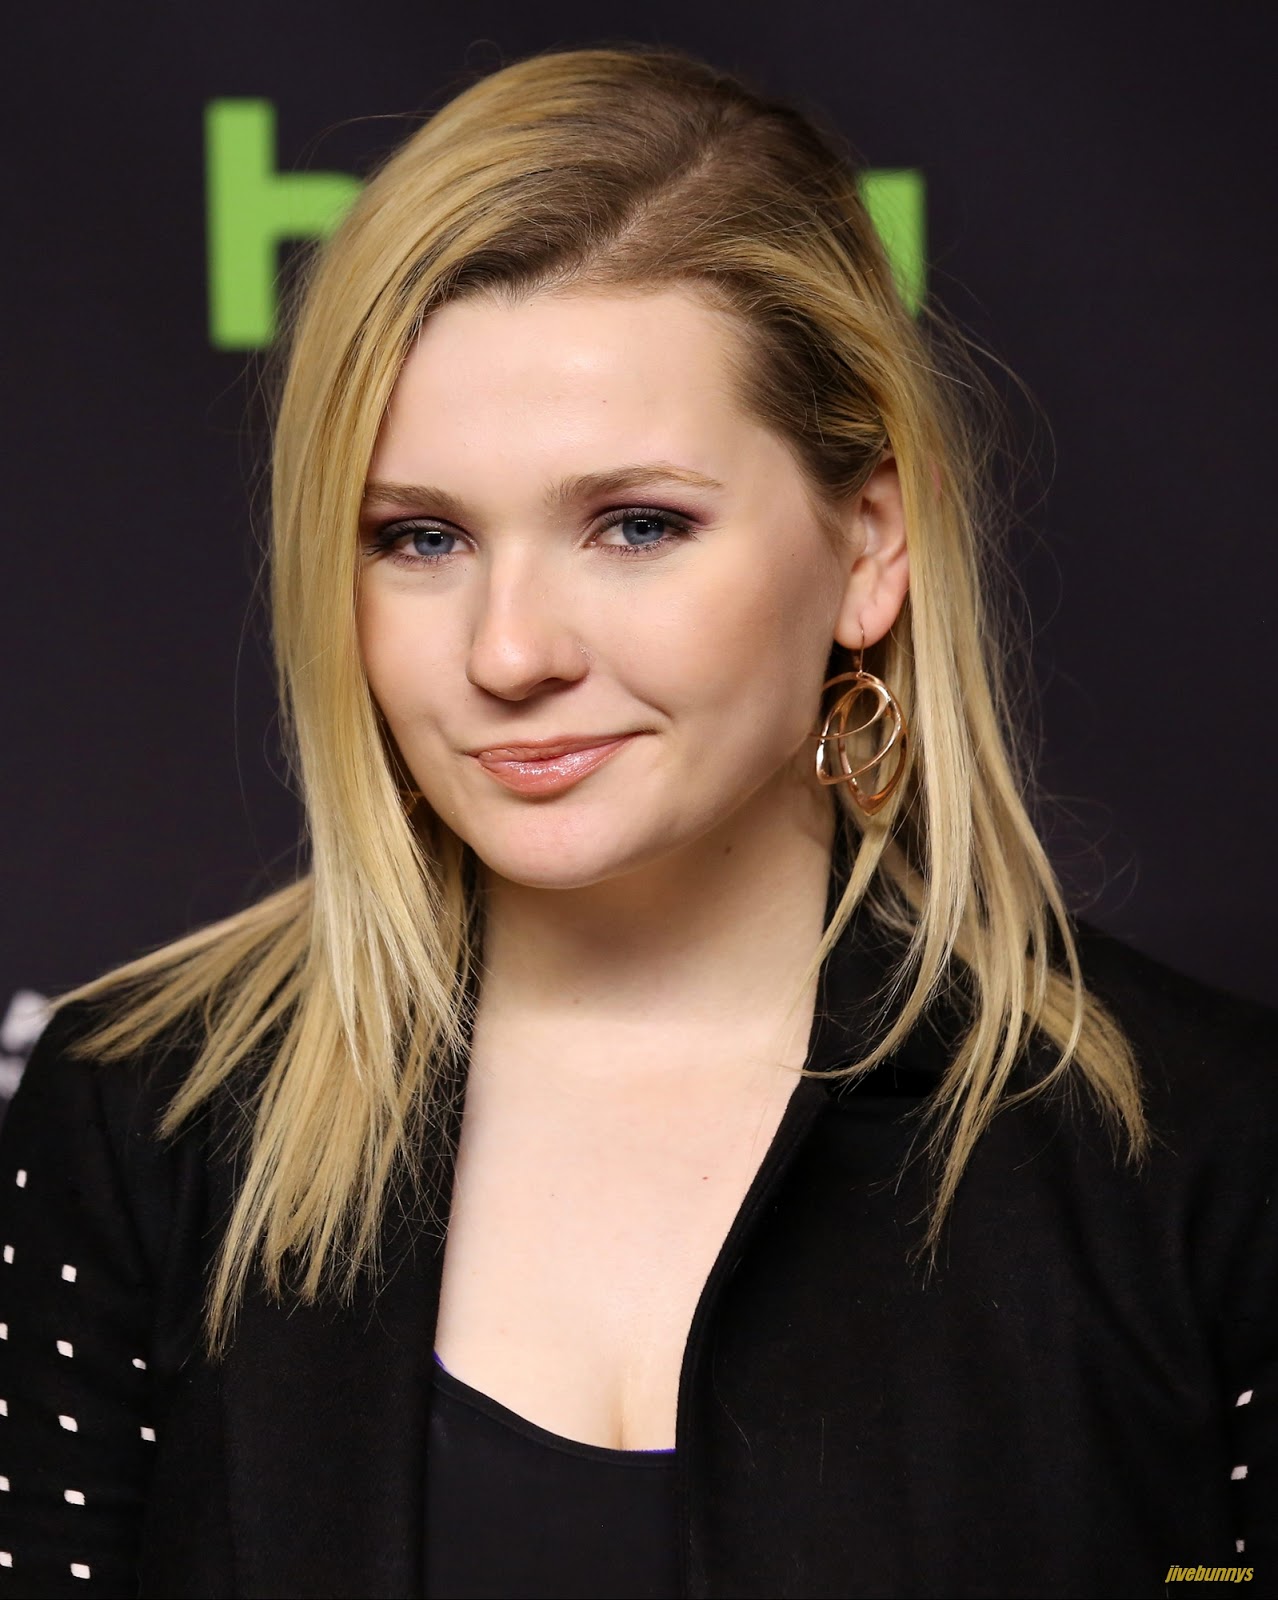 Abigail Breslin HQ Photos Gallery 4 : Celebrity About